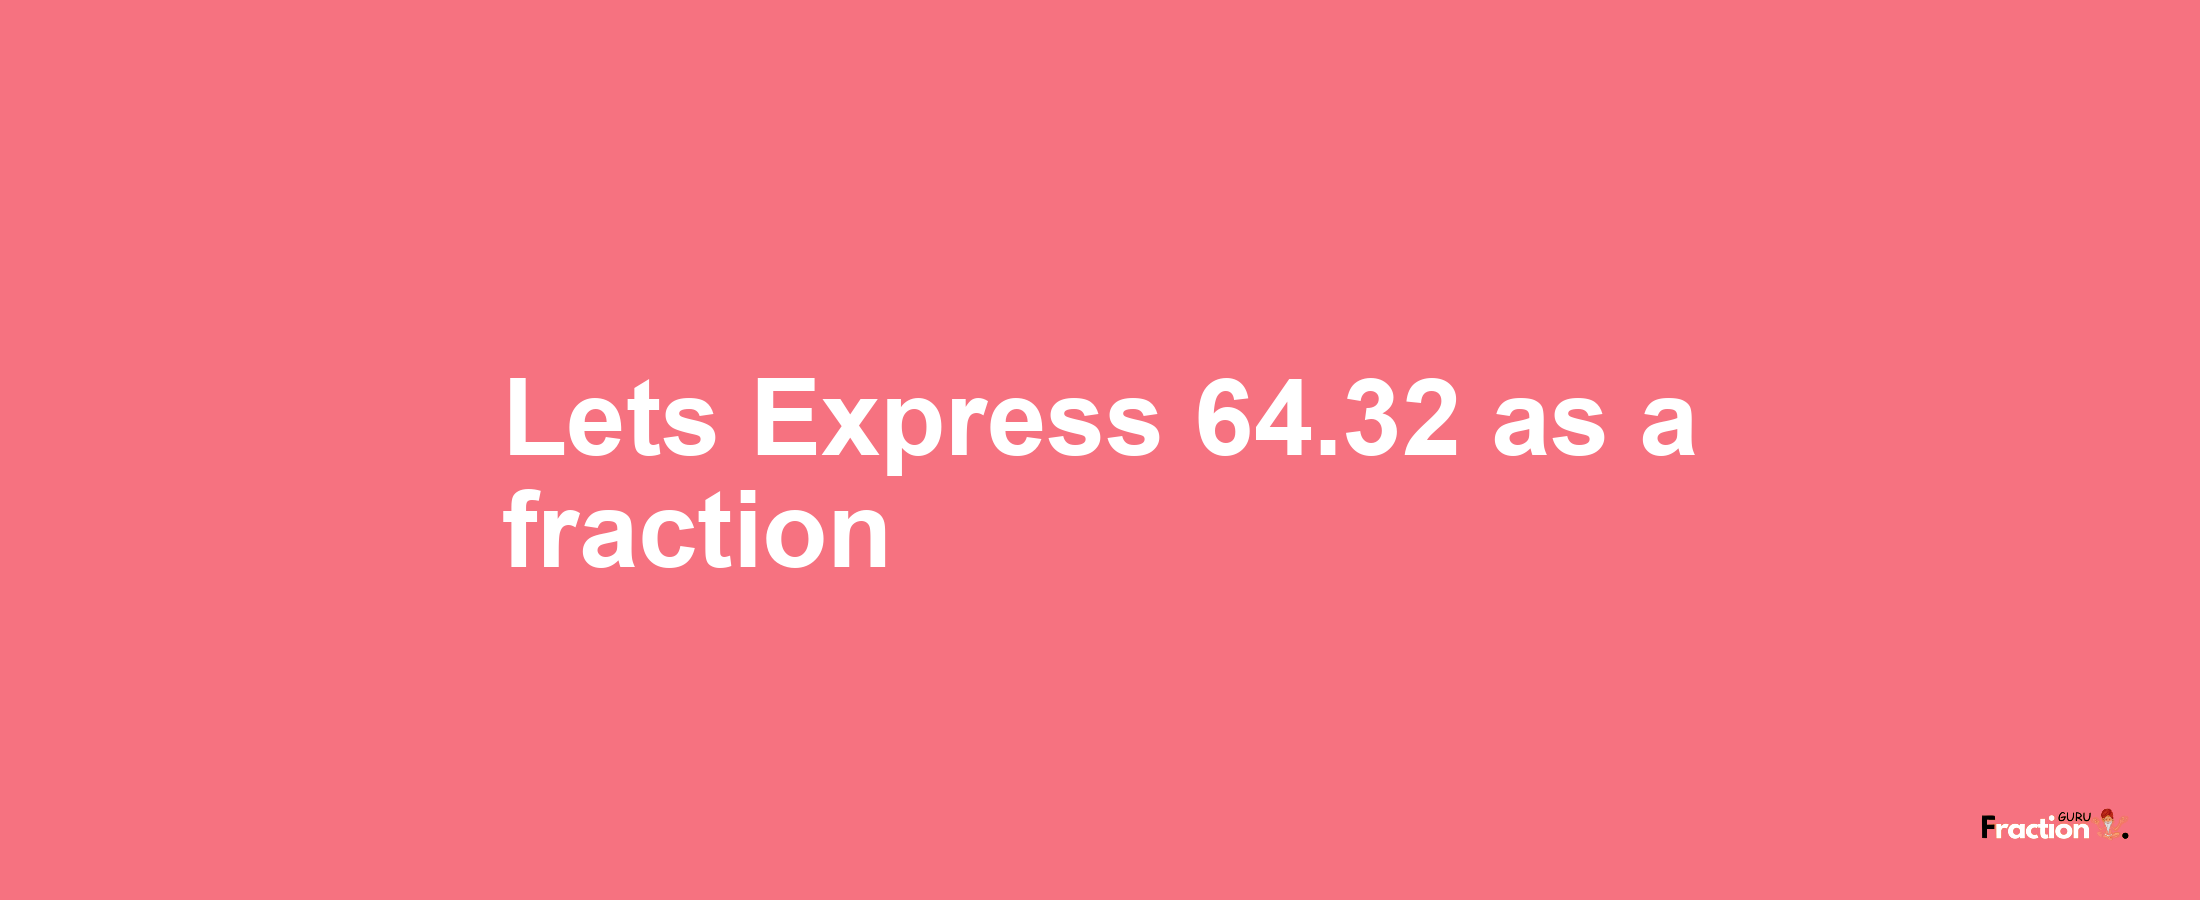 Lets Express 64.32 as afraction